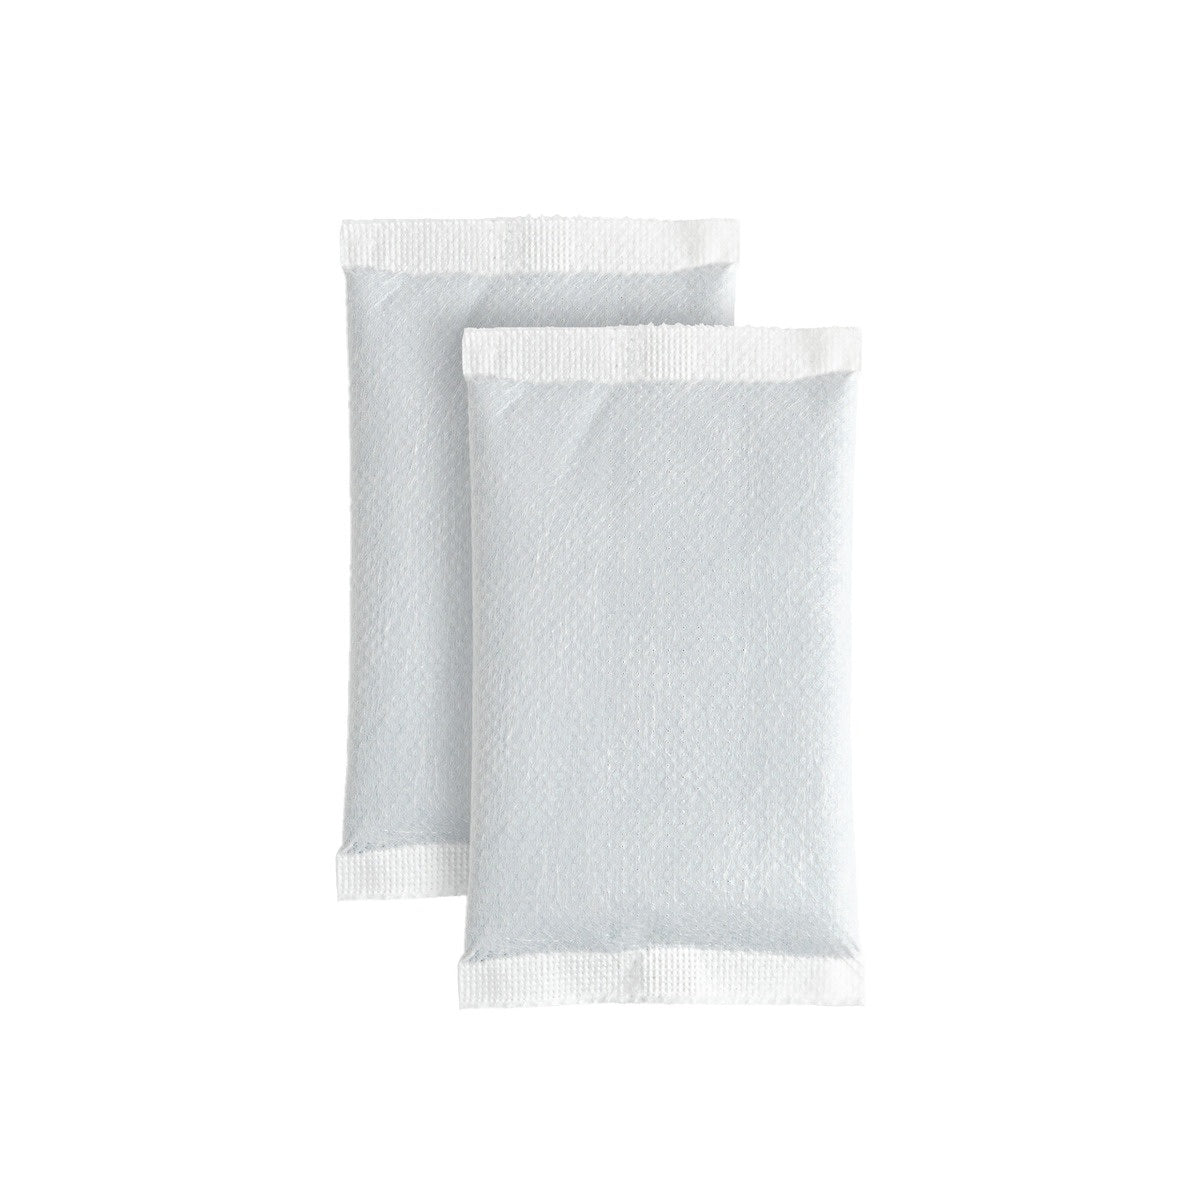 THAW Disposable Hand Warmers - 1 Pair